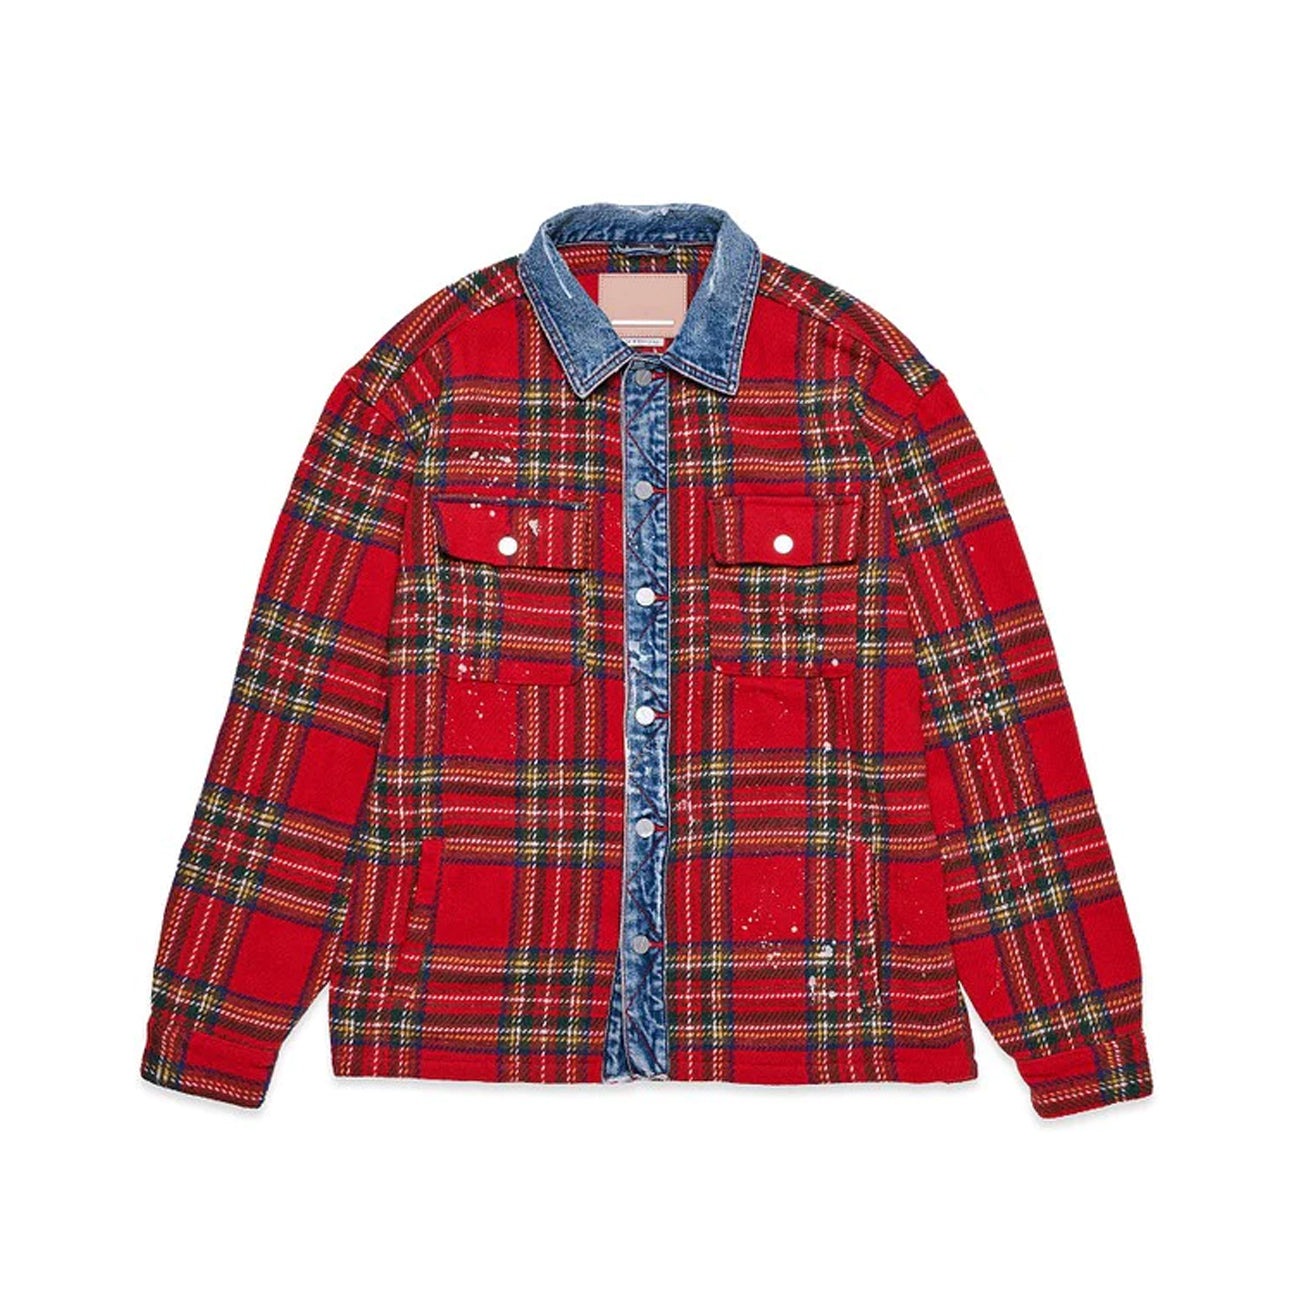 UNISEX FLANNEL SHACKET WITH DENIM CONTRAST